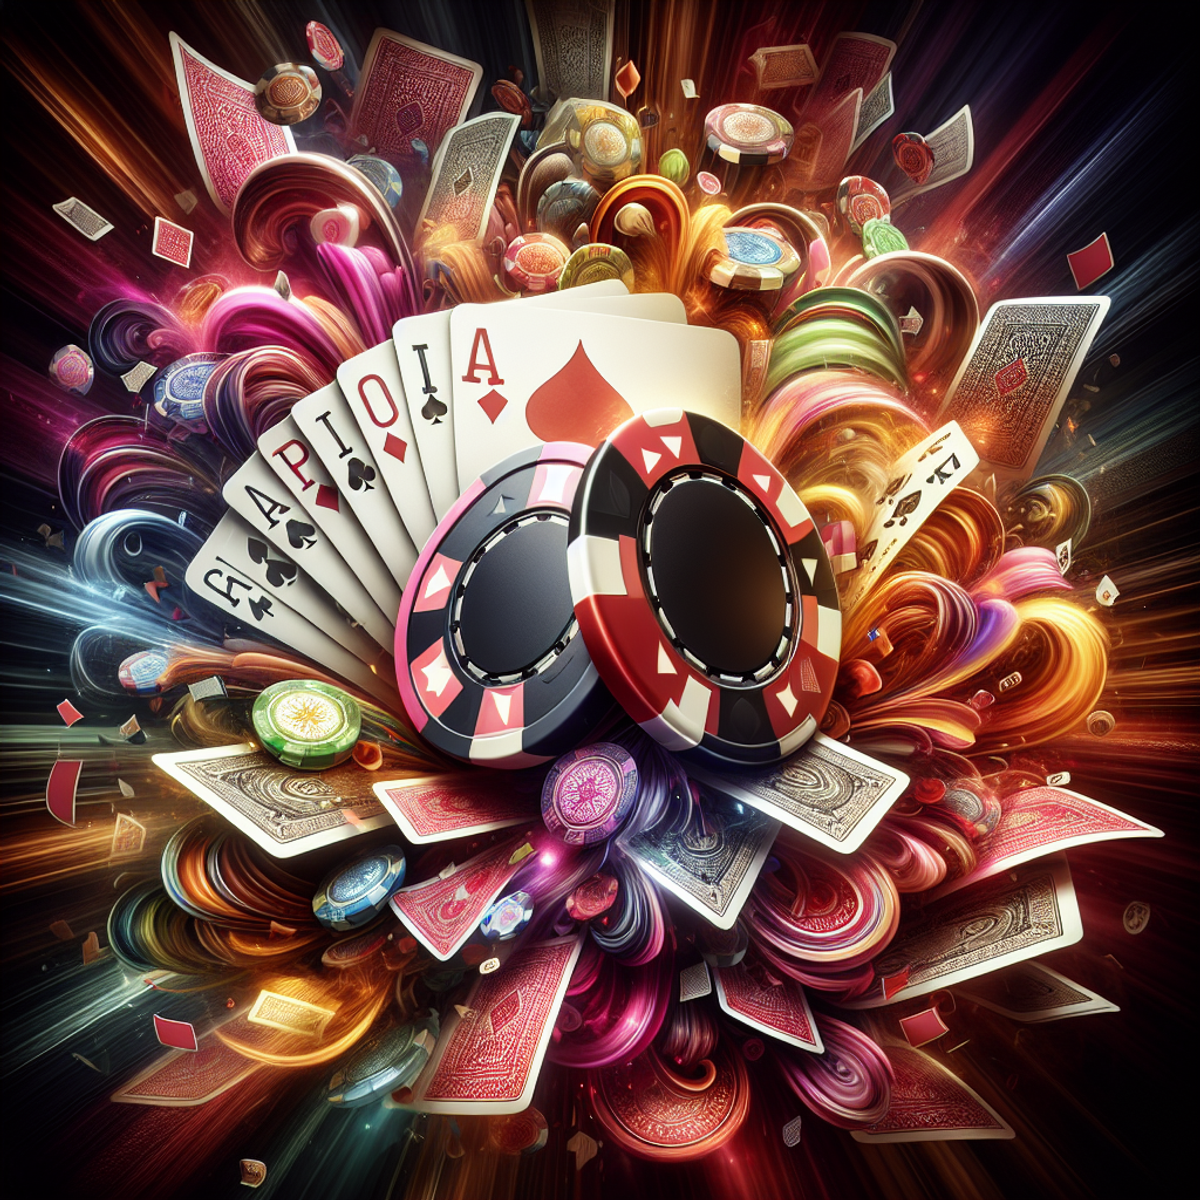 A close-up photograph of a casino chip surrounded by a spread of colorful playing cards, evoking the vibrant and electrifying atmosphere of a bustling